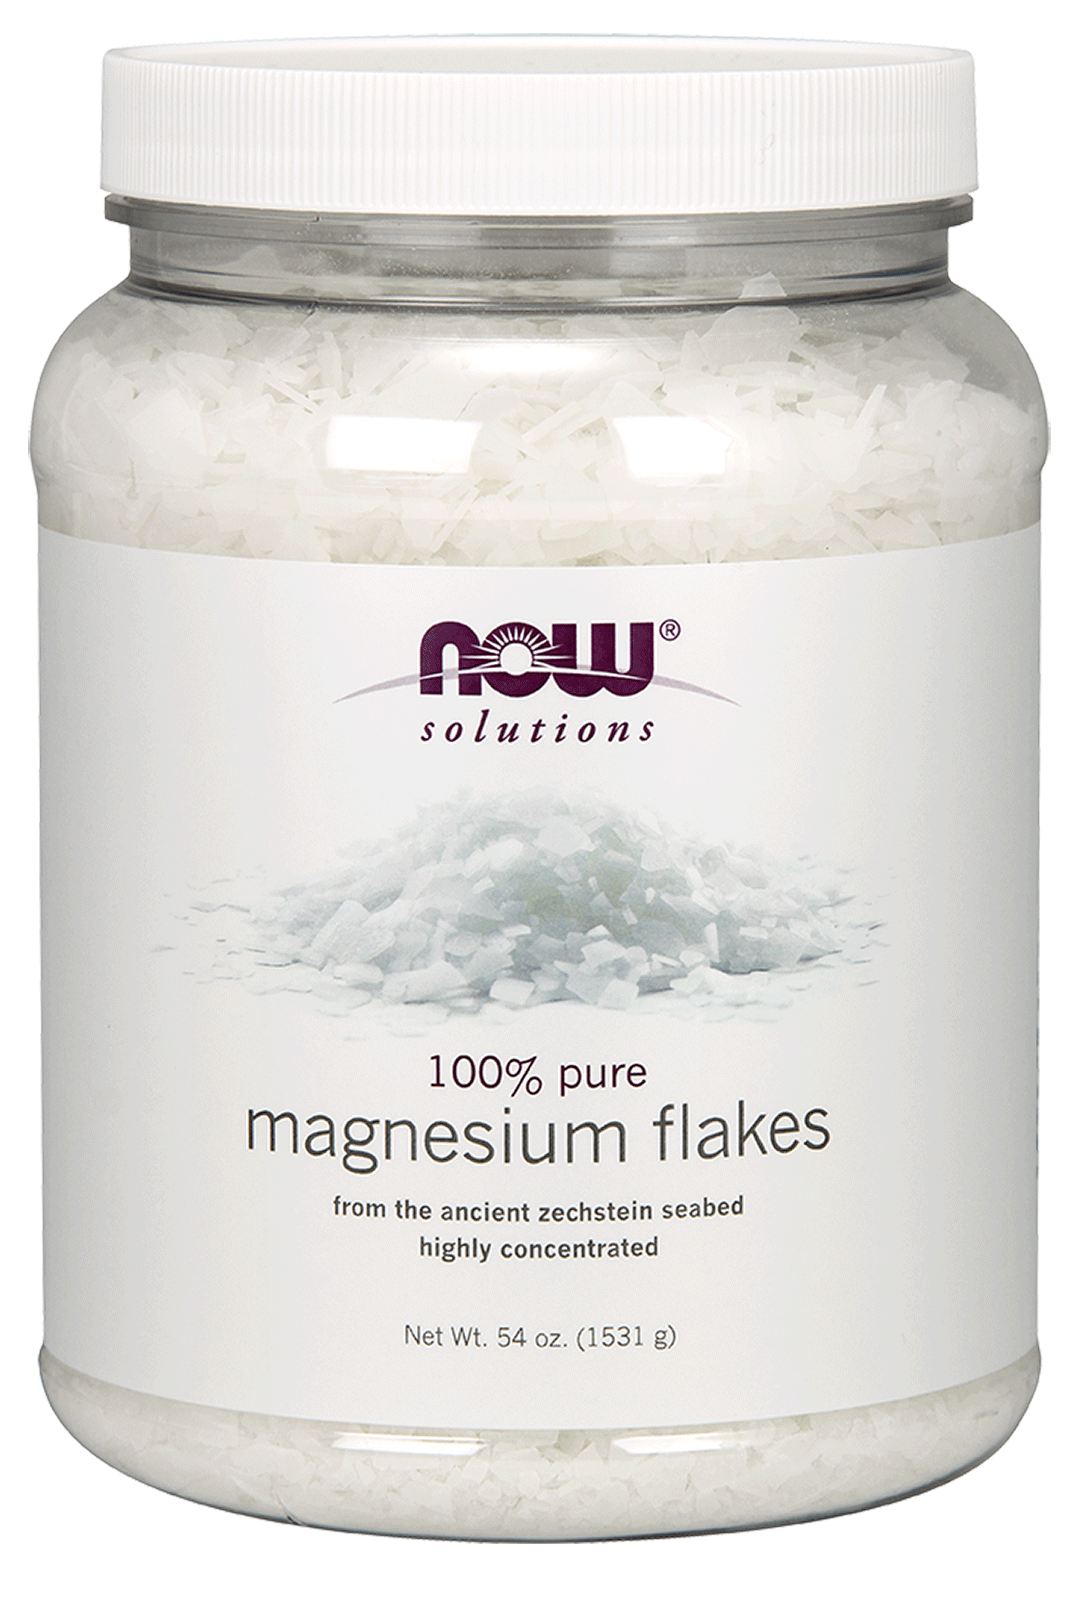 A container of NOW Solutions 100% pure Magnesium Flakes. From the ancient zechstein seabed, highly concentrated. (54 oz, 1531 g)